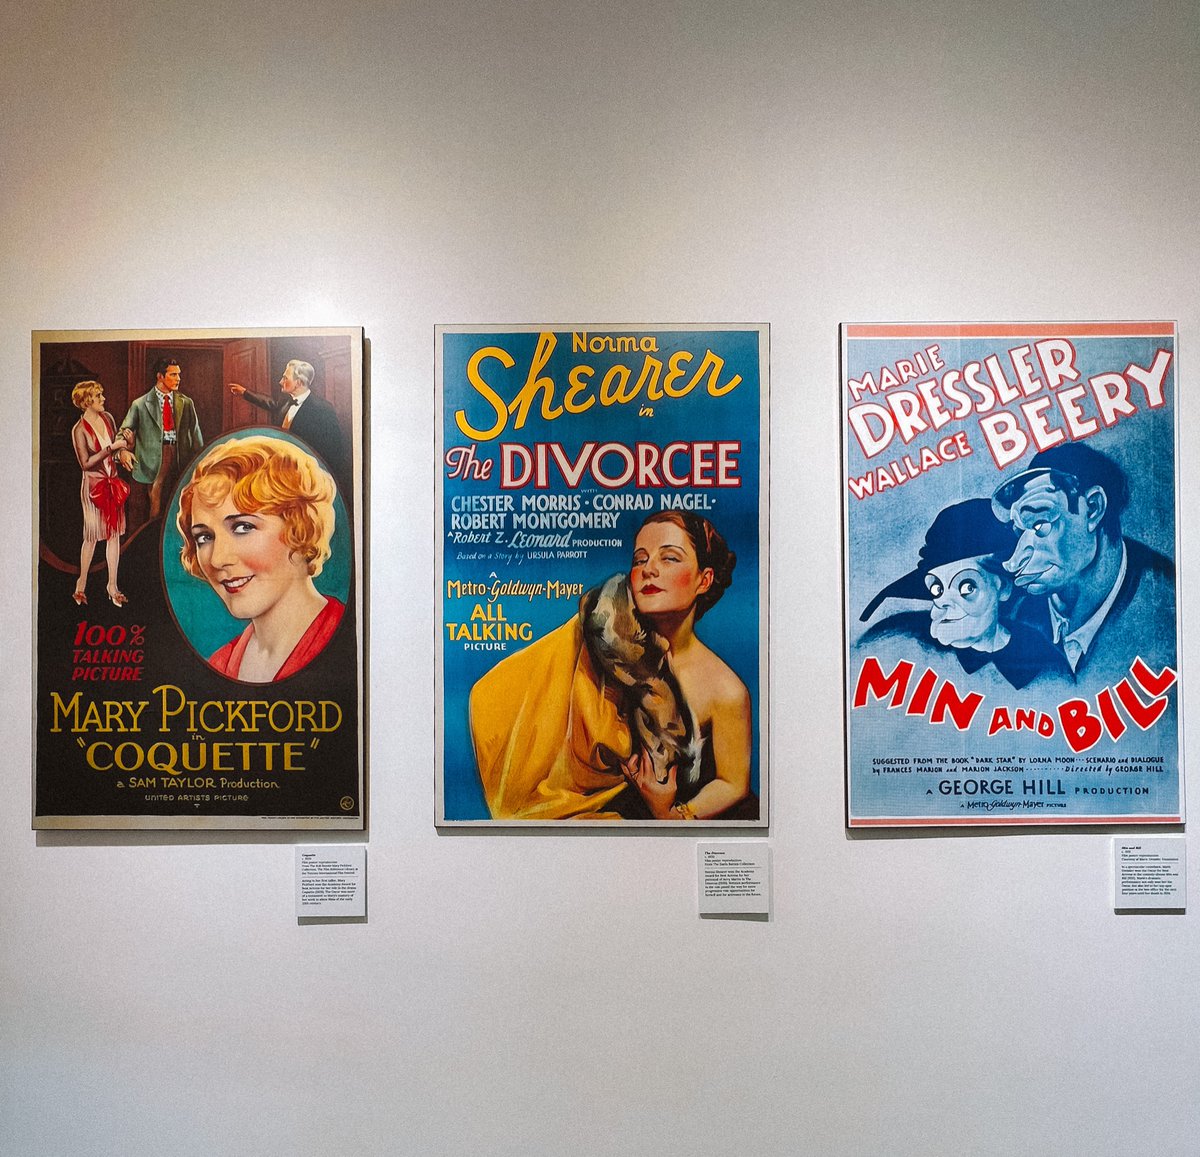 Visiting #Cobourg for the annual #sidewalksale this weekend? Stop by the @mariedresslermuseum for your fun and interactive tour! #filmmuseum #canadianfilmstars #mariedressler #marypickford #normashearer